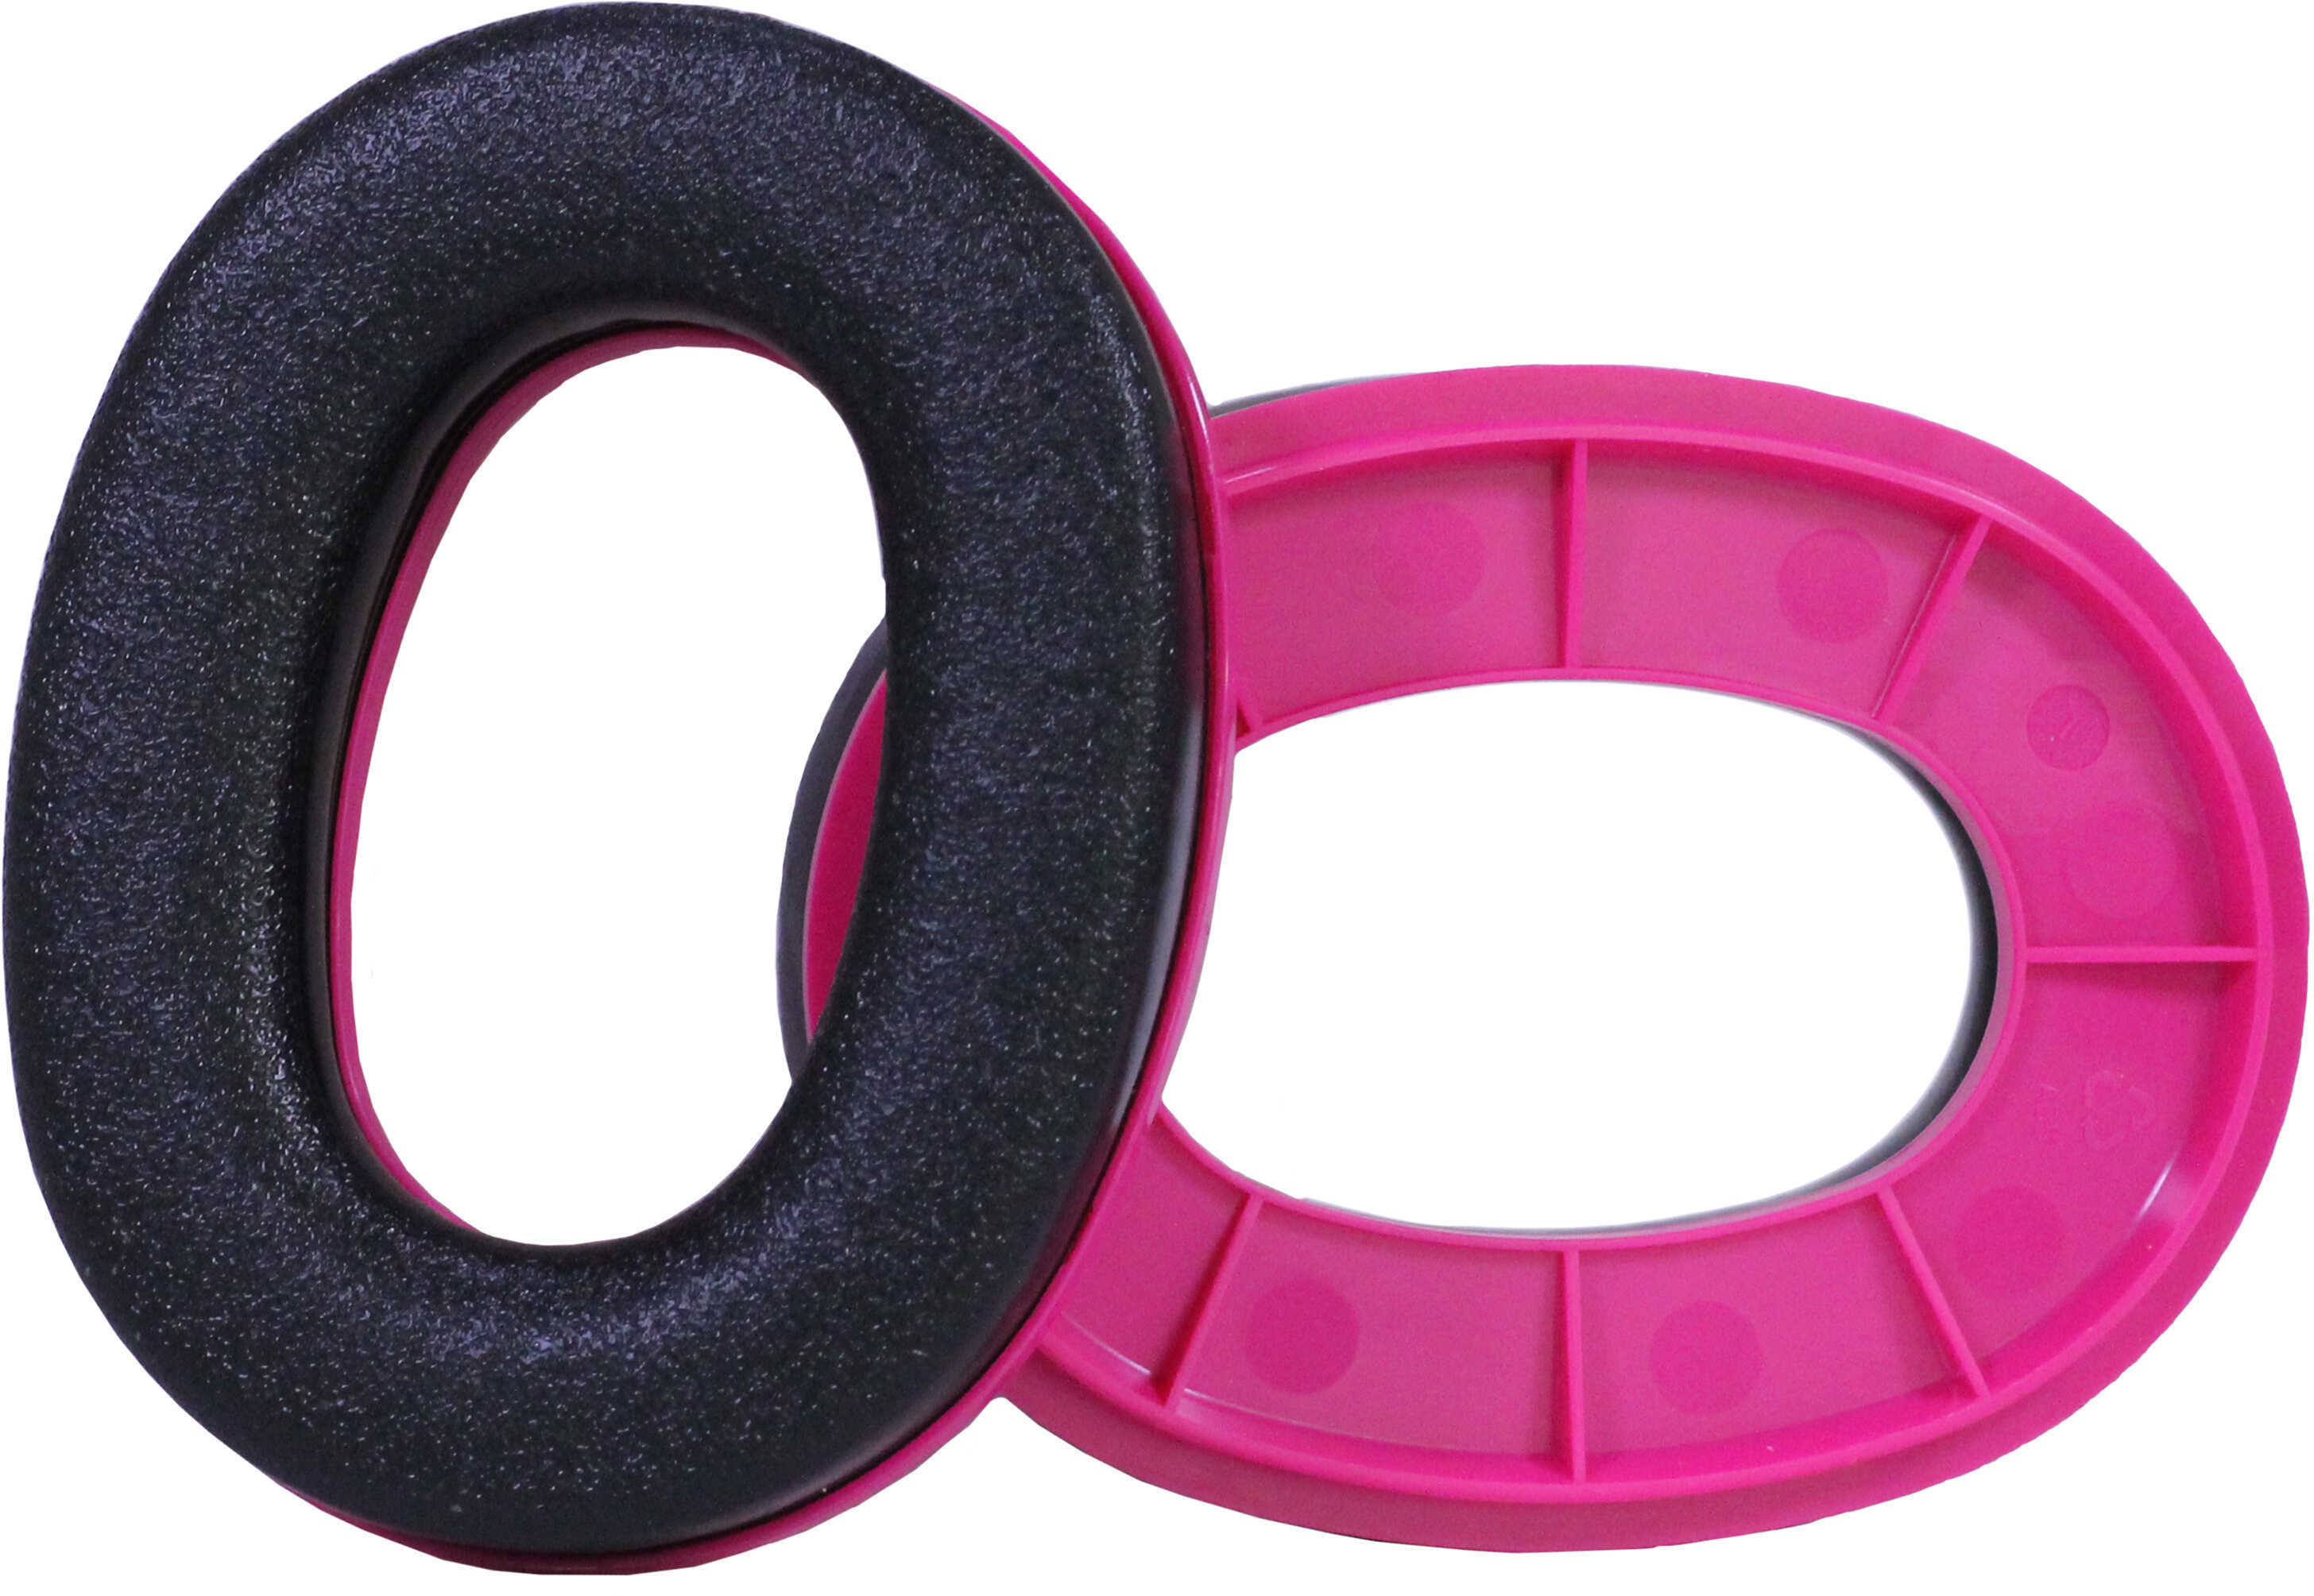 Peltor Sport Ear Cusion Cust Ring Set Black / Pink for Tactical 100 or RangeGuard